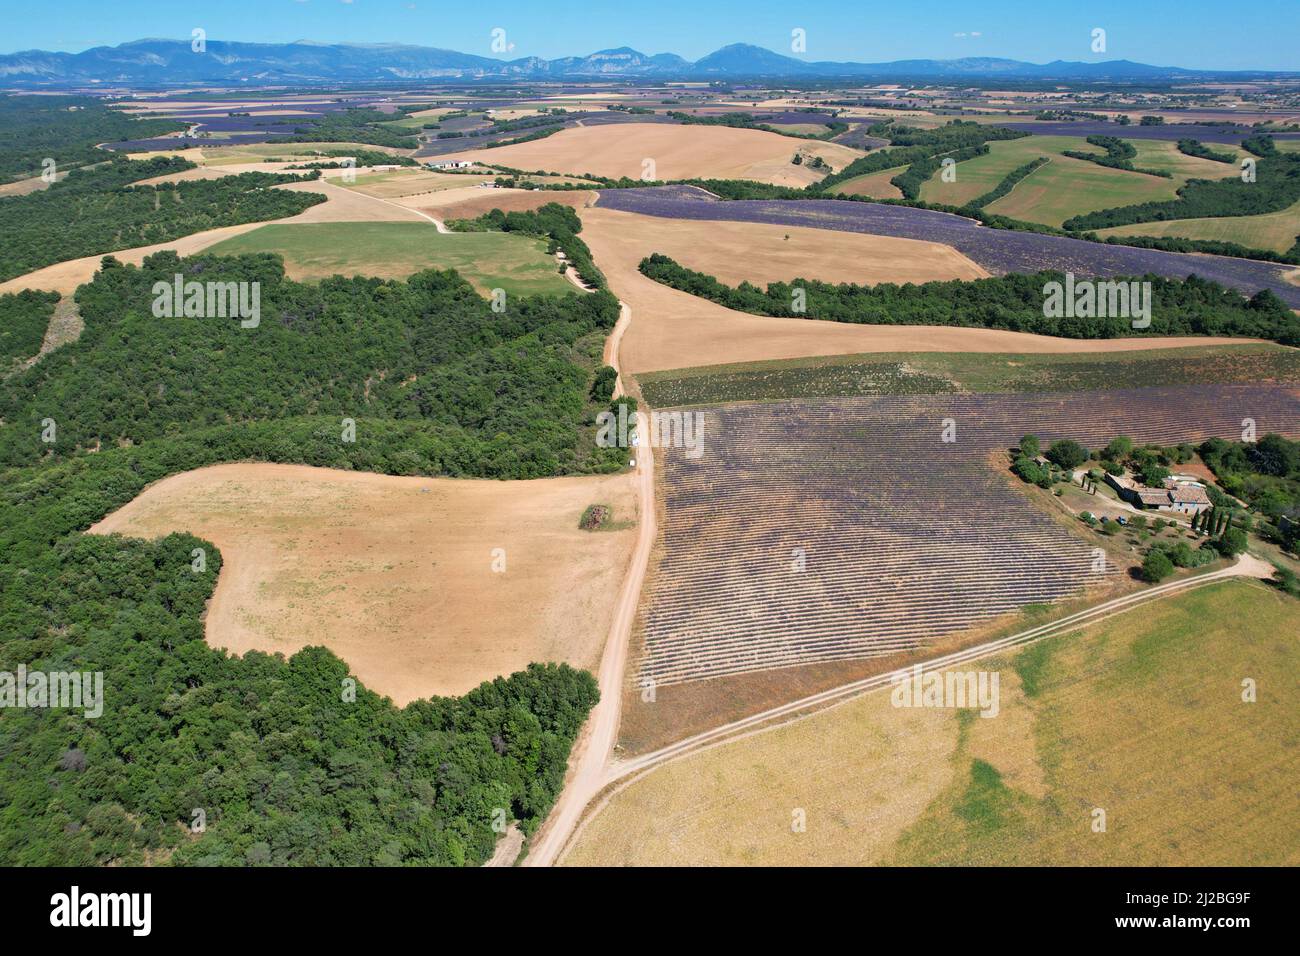 Aerial view of the lavender fields on the Plateau de Valensole in the Alpes-de-Haute-Provence in the South of France Stock Photo